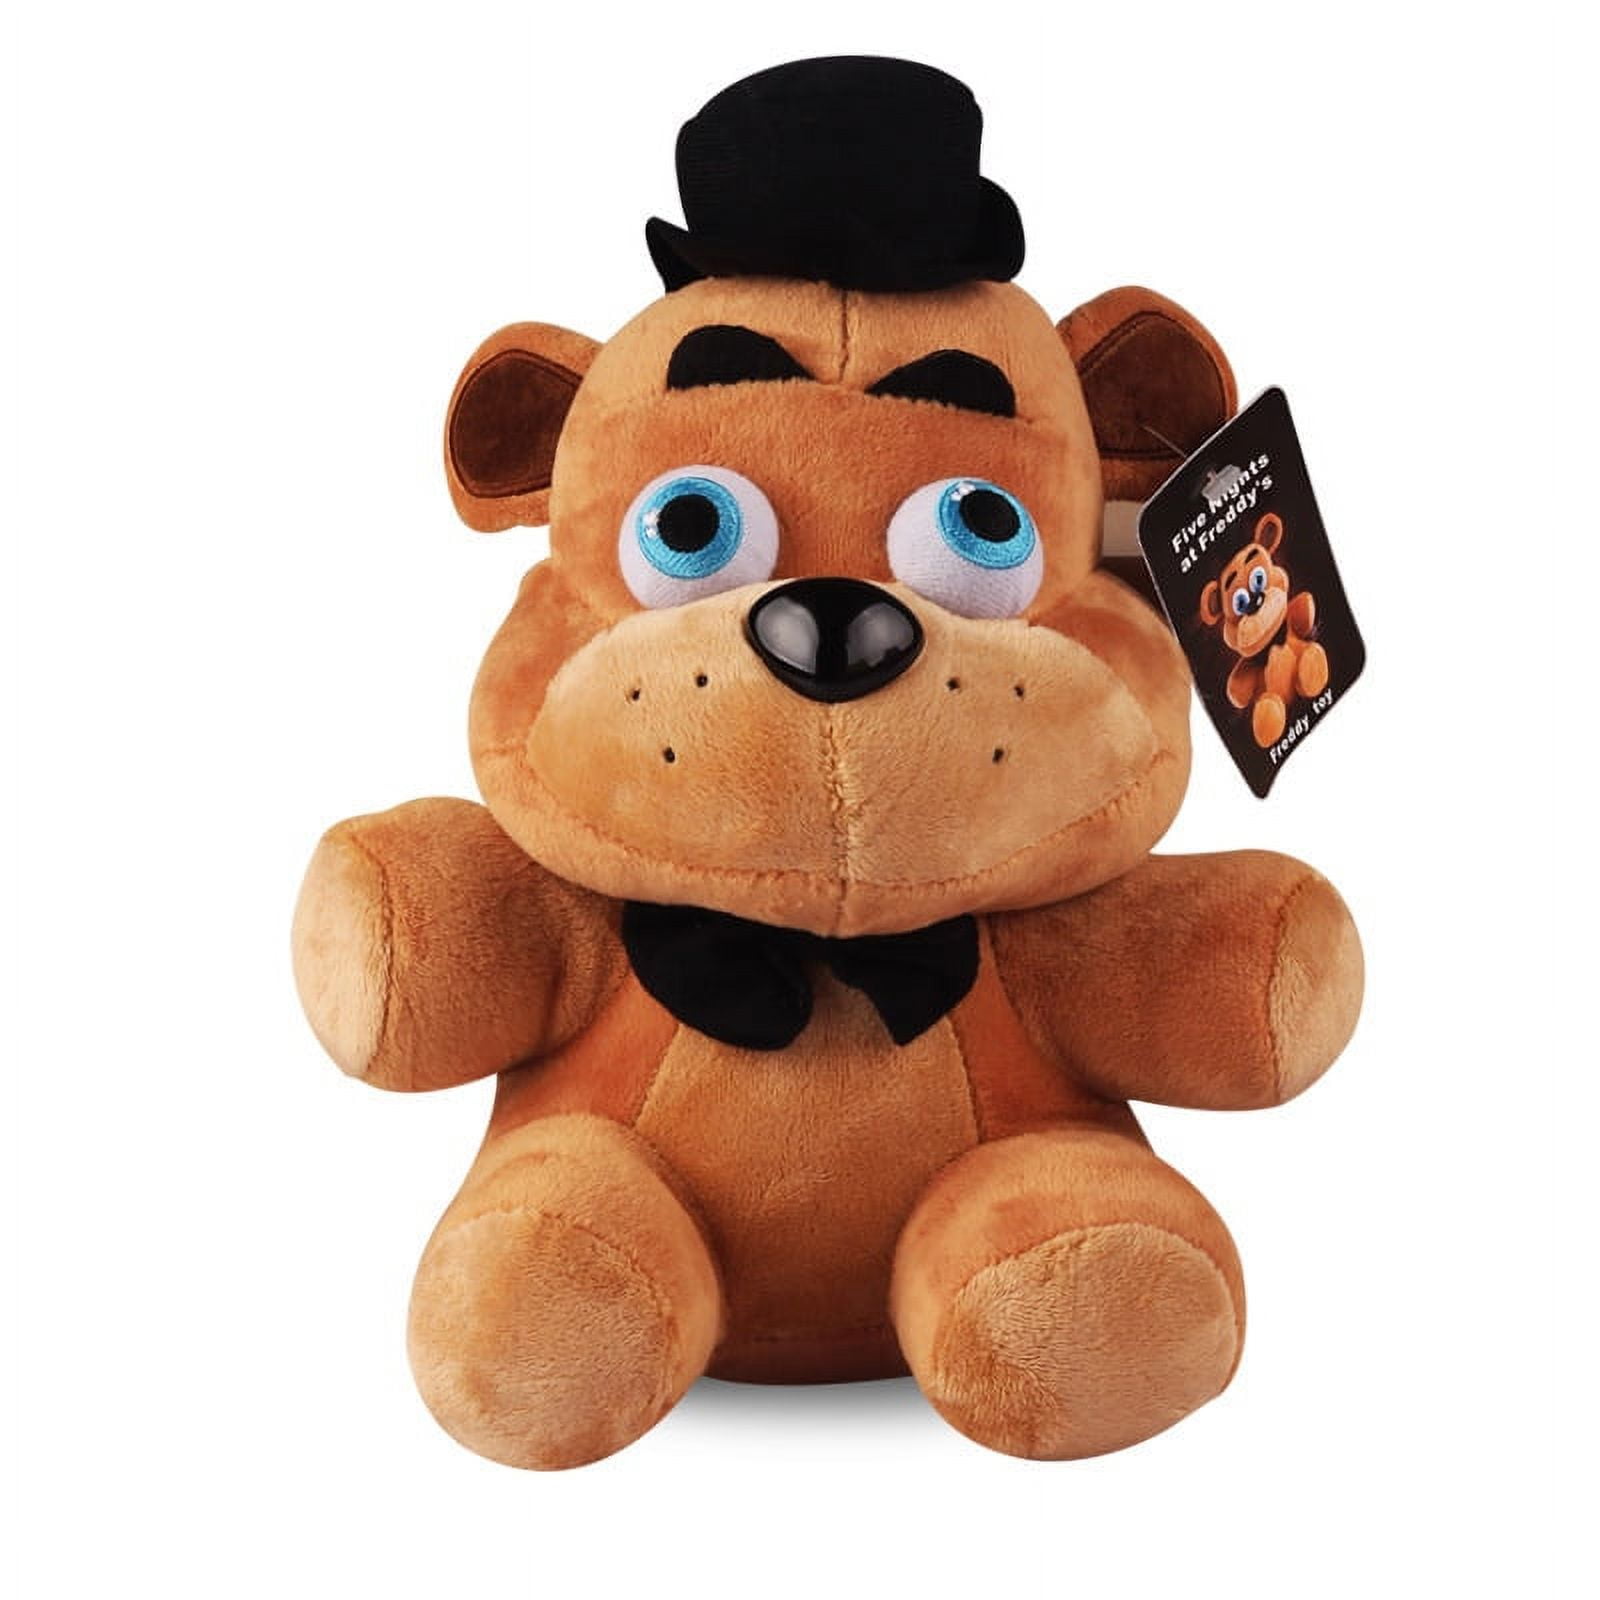 Zufernab 5pcs FNAF Plushies Set, Five Nights at Fre_ddy's Plushies, 5  Freddy's Fanf Plushie All